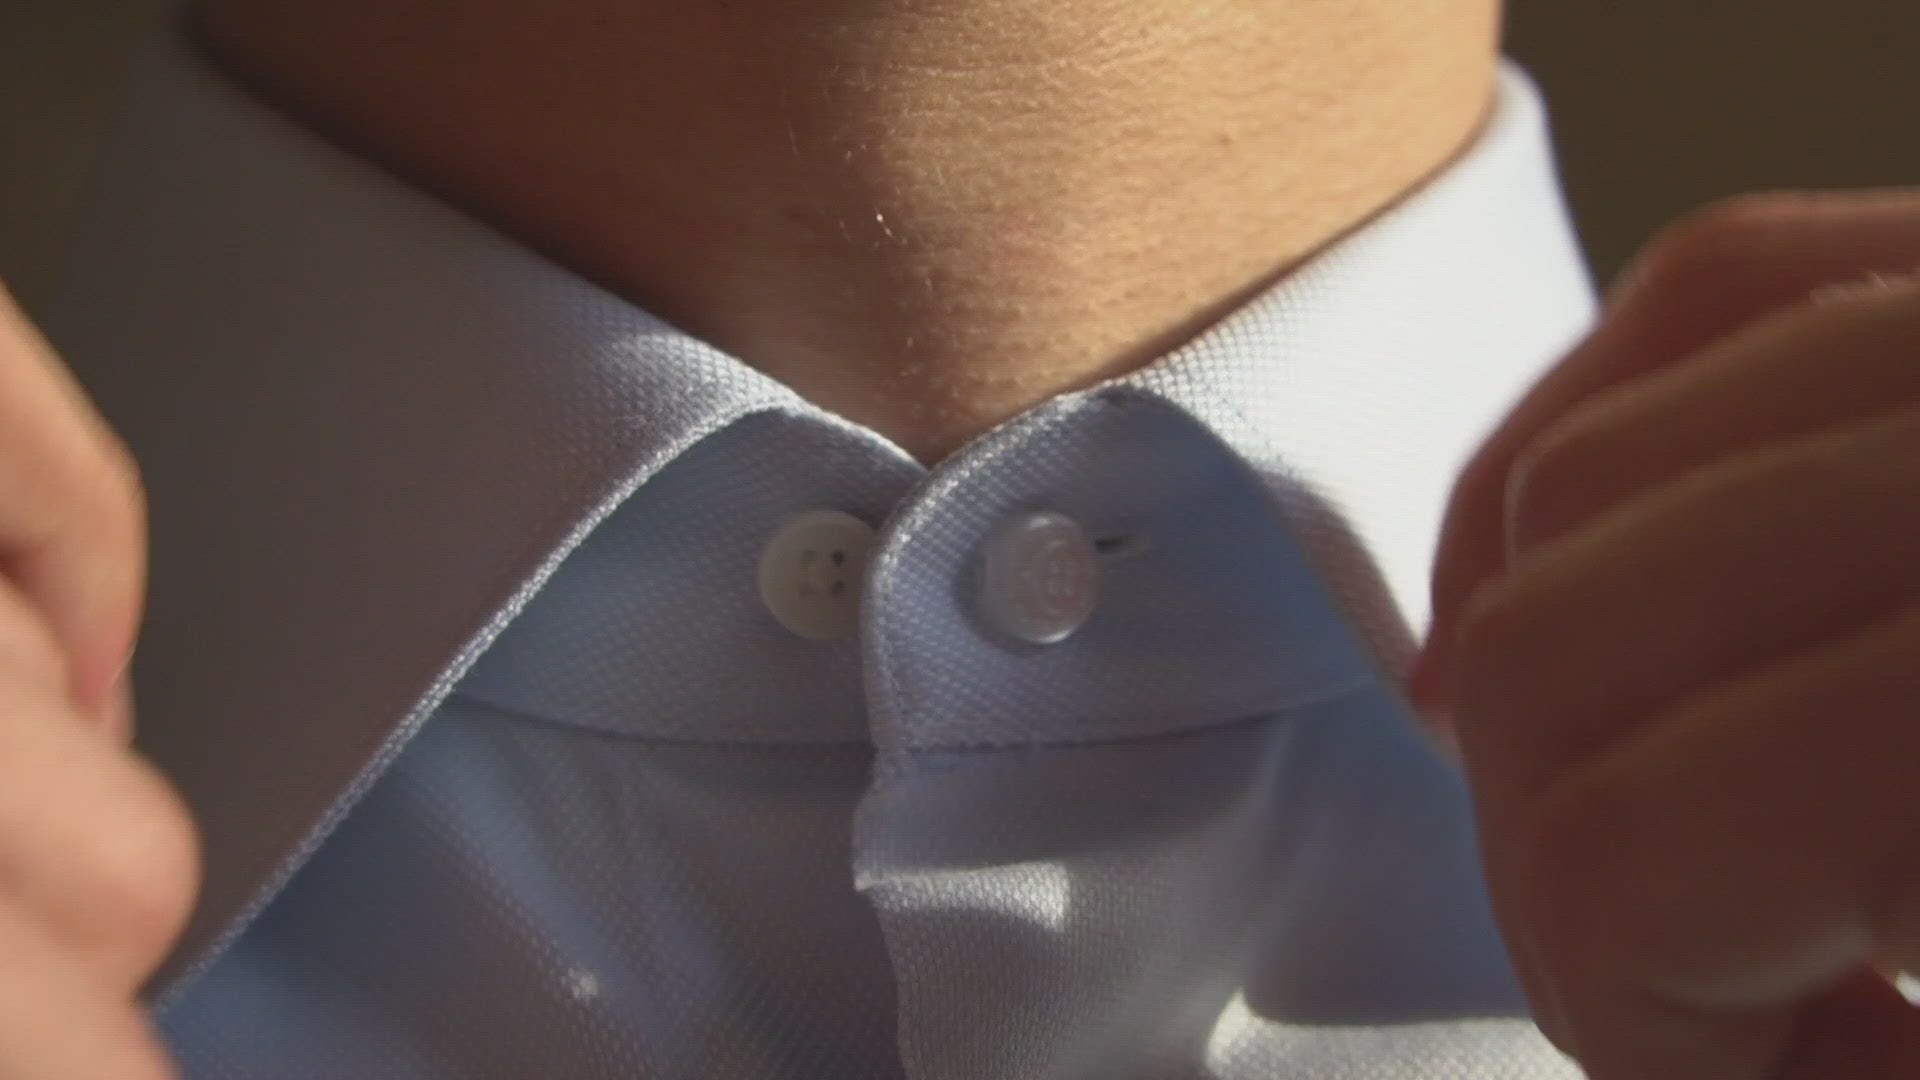 HOW TO: Extend Your Dress Shirt's Collar With Cochic's Collar Extender 